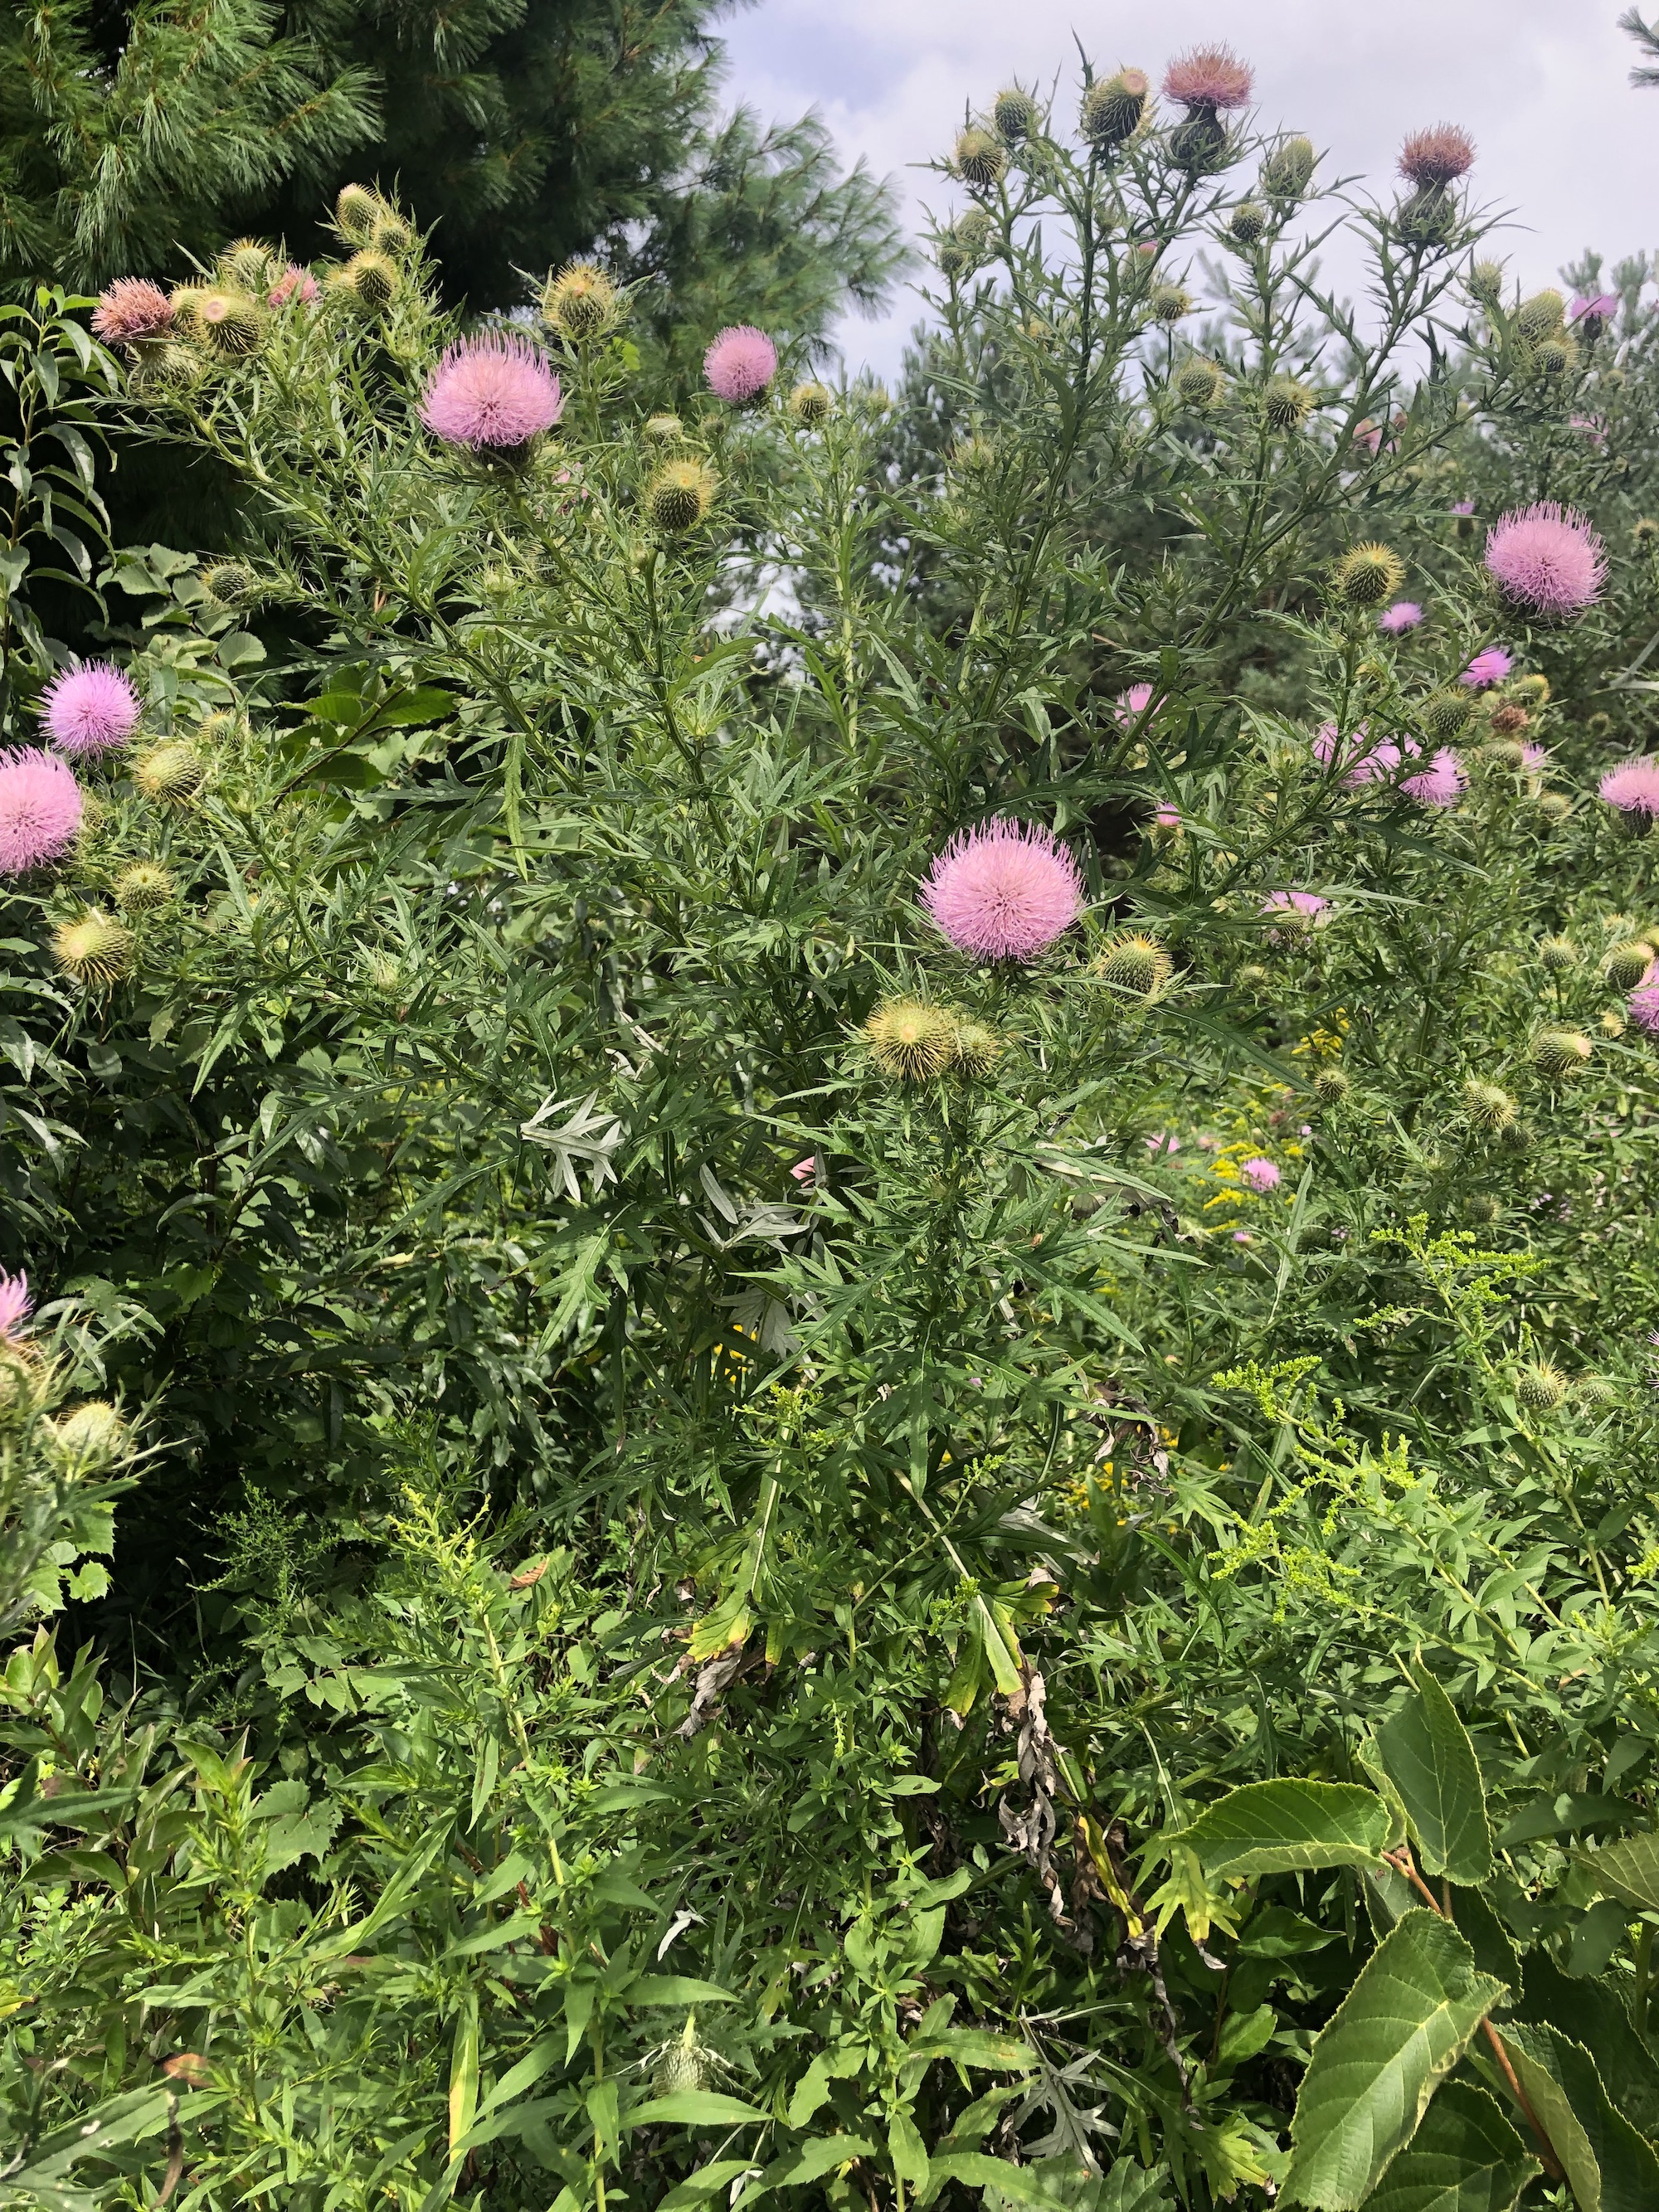 Field Thistle in the Prairie Moraine Dog Park in Verona, Wisconsin on August 15, 2022.